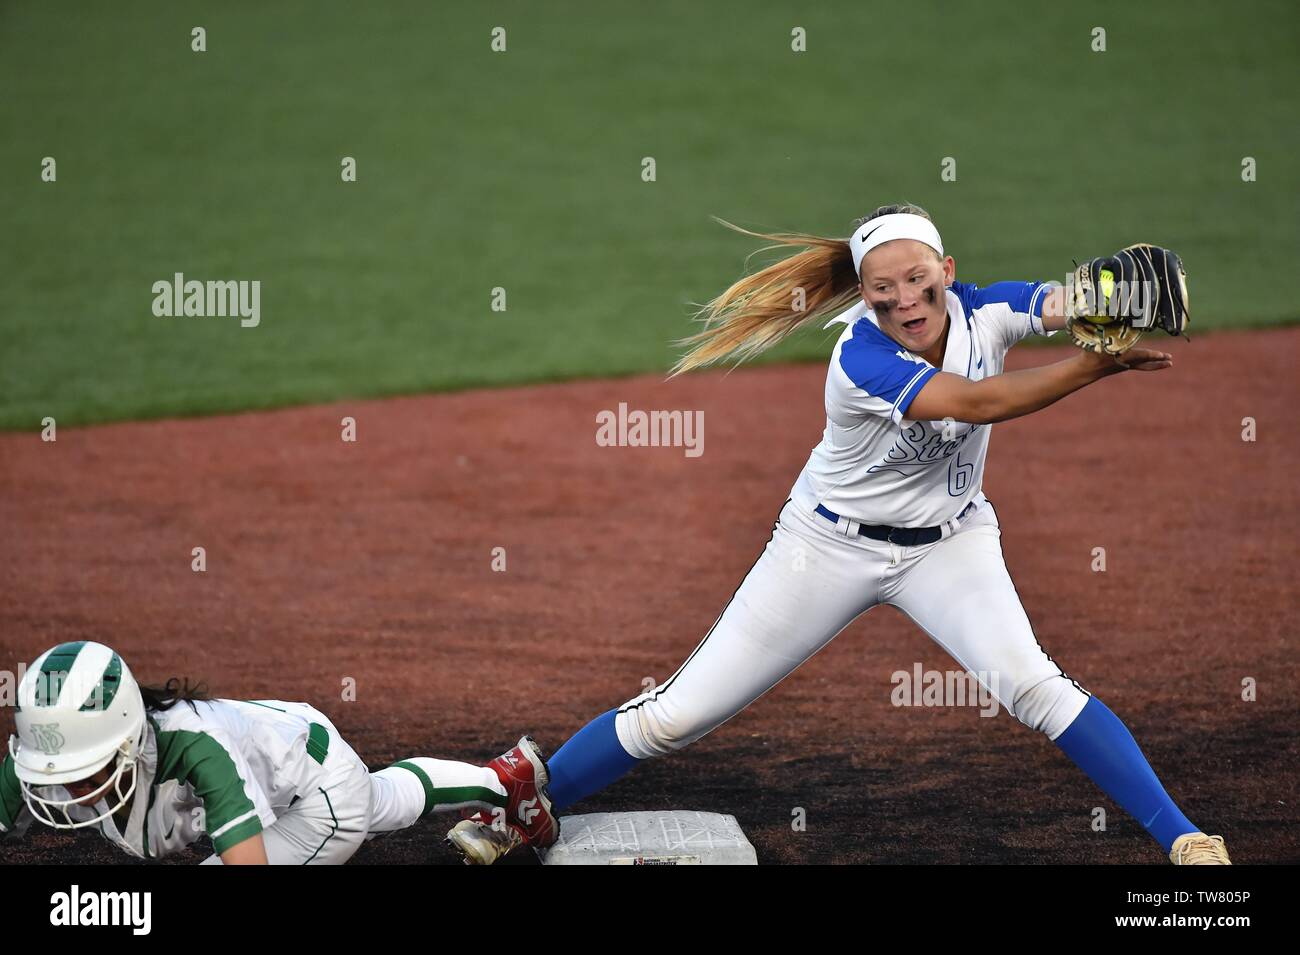 Shortstop taking a throw in an effort to catch an opposing runner. USA overrunning second base. USA. Stock Photo